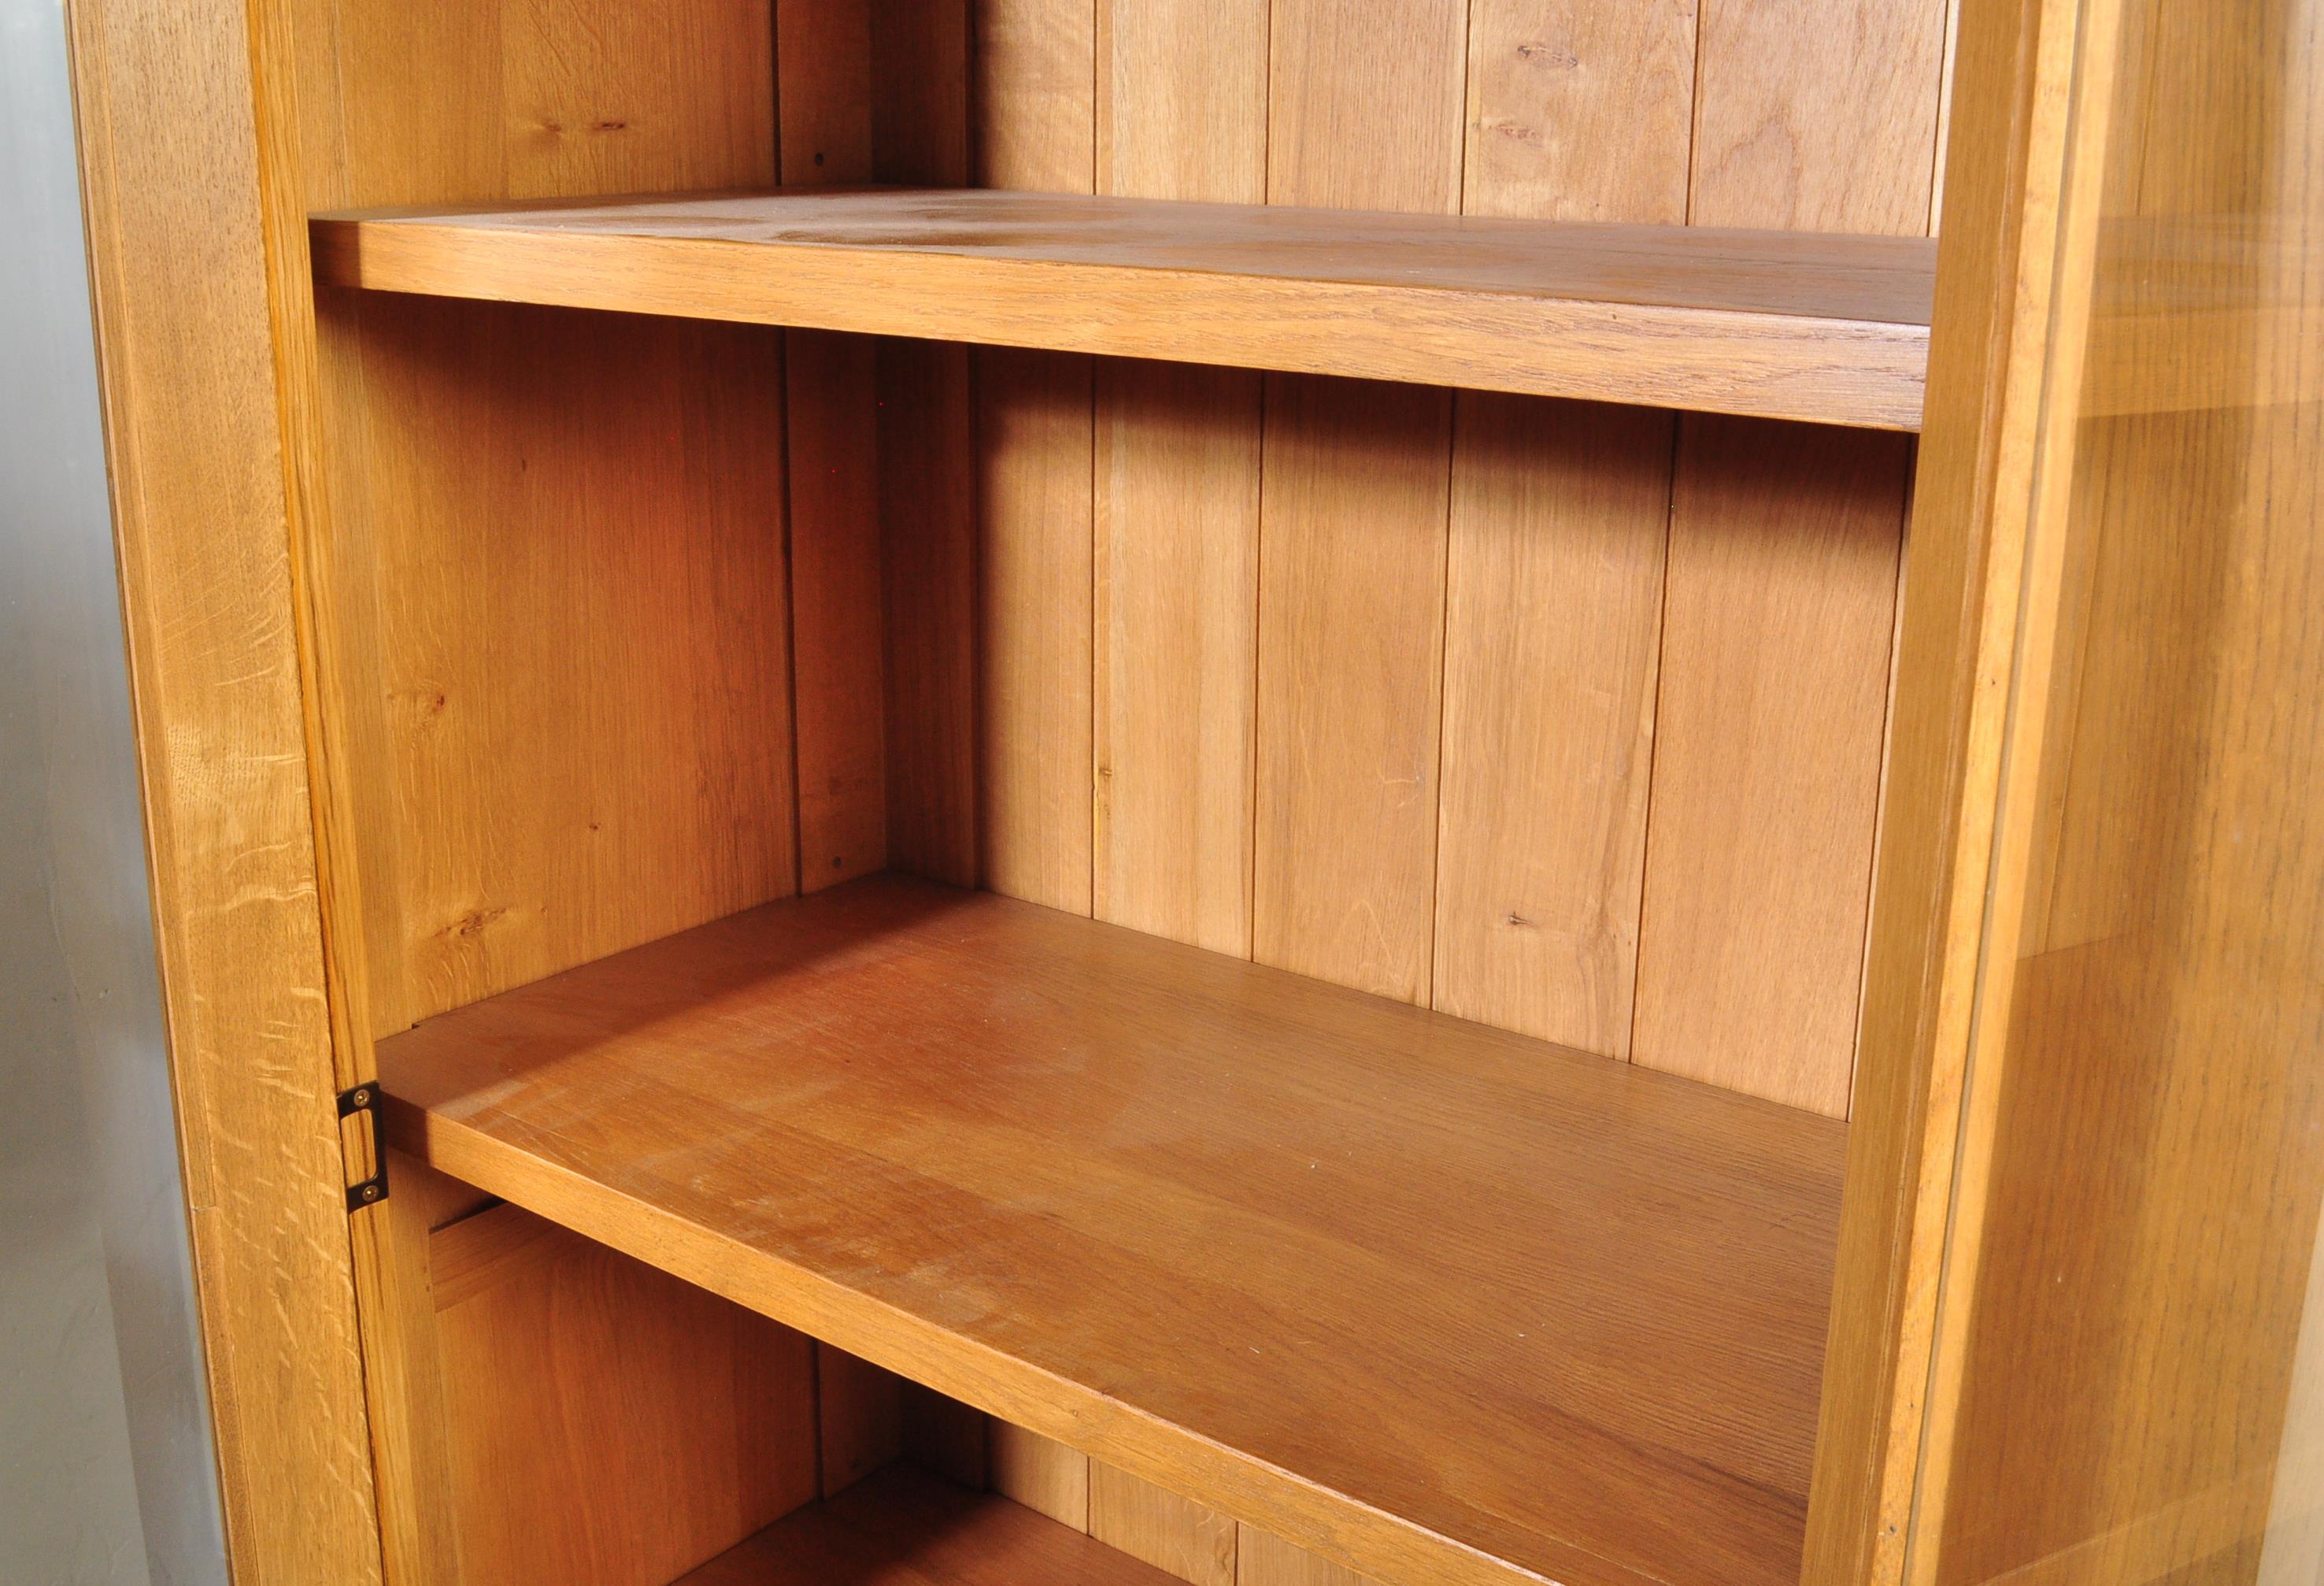 CONTEMPORARY OAK FURNITURE LAND STYLE BOOKCASE - Image 3 of 5